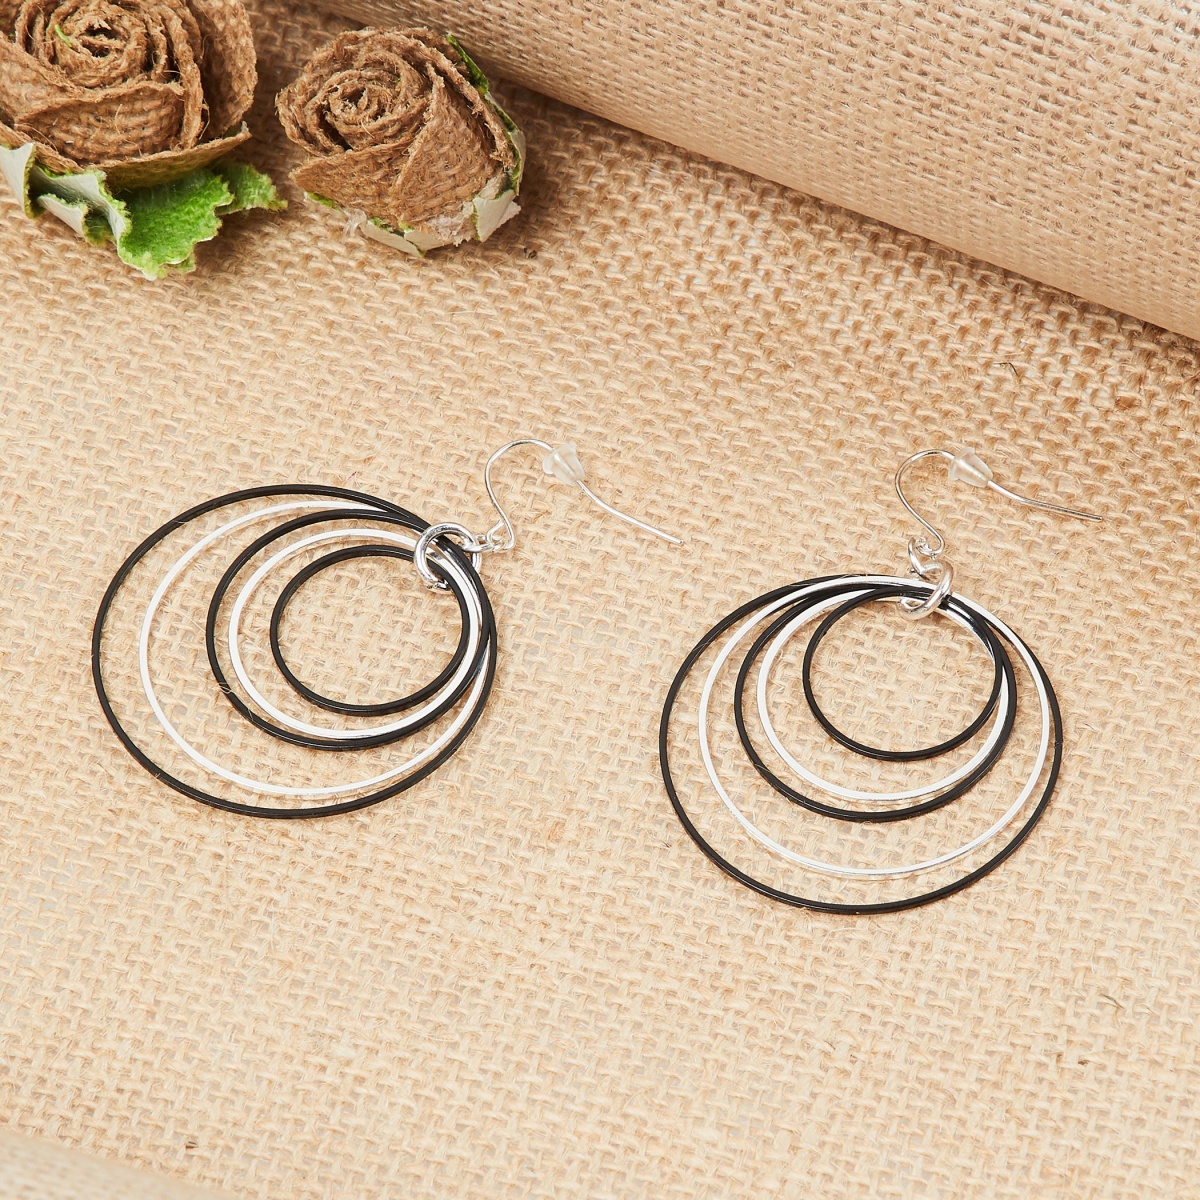 Estele Gold Plated Big Round Hoop Earrings for Women  Girls at Nykaacom